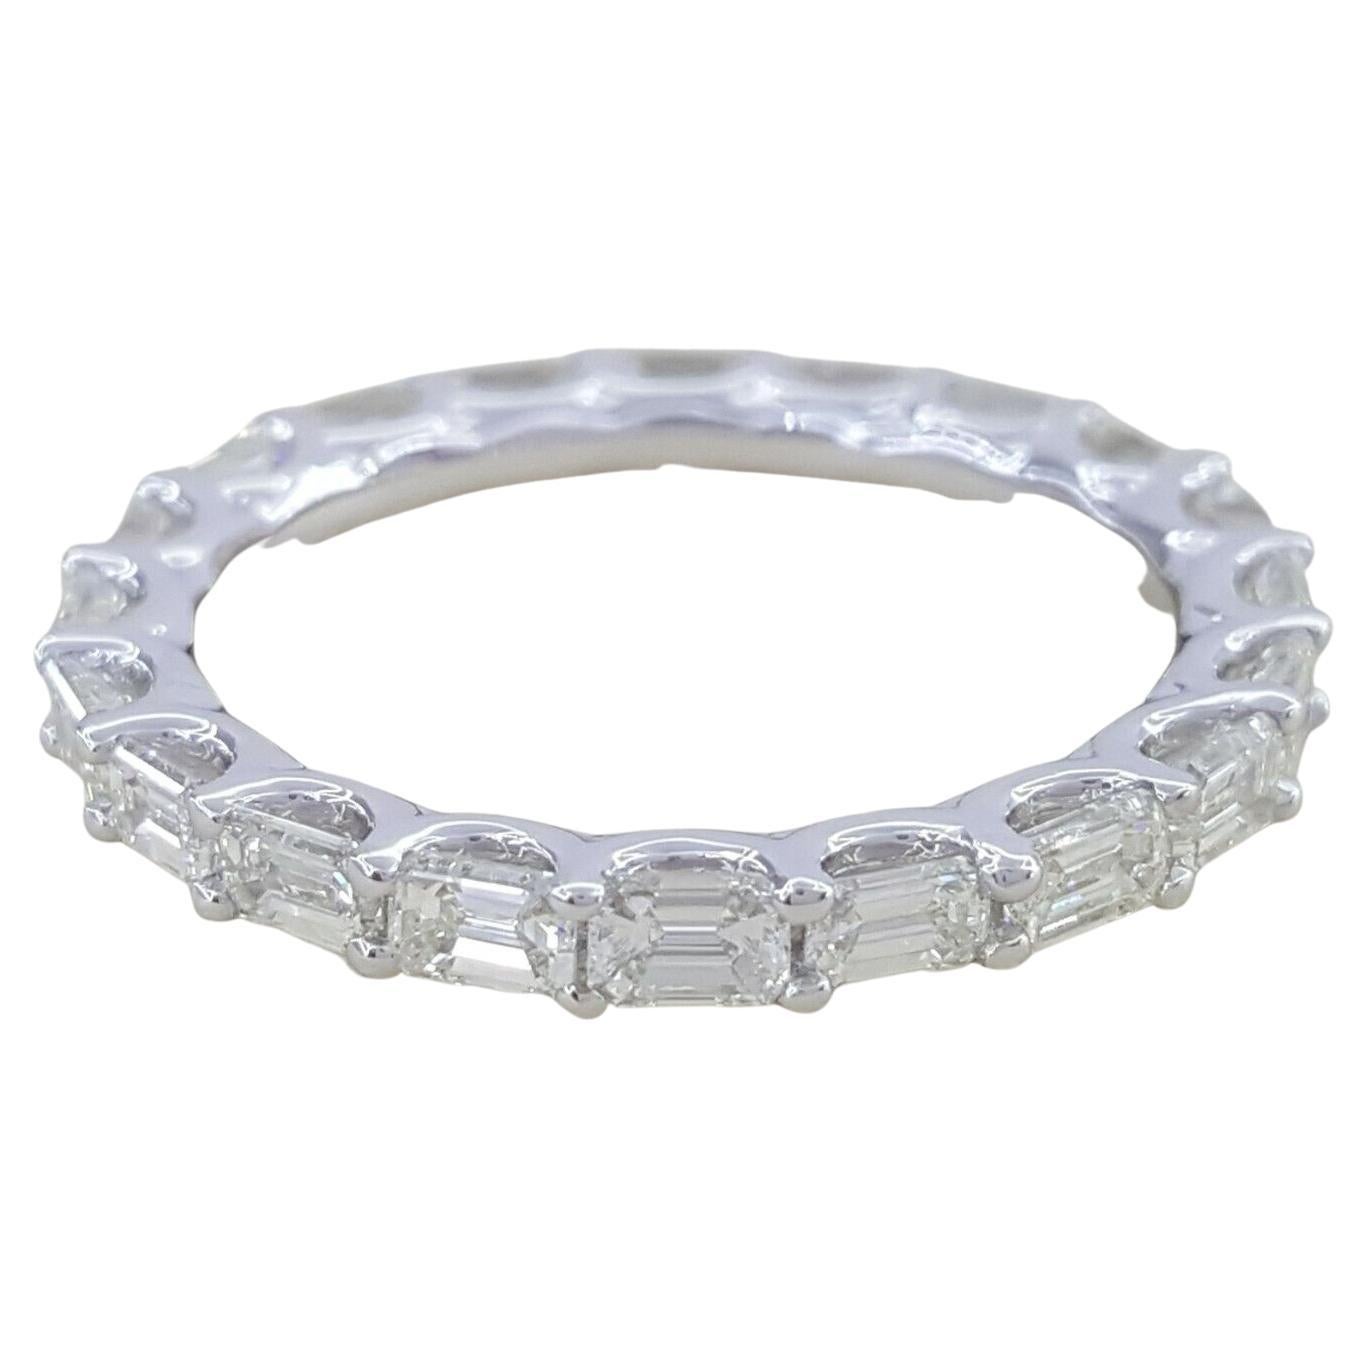 Contemporary Eternity Band Ring 2 Carat Emerald Cut Diamonds For Sale